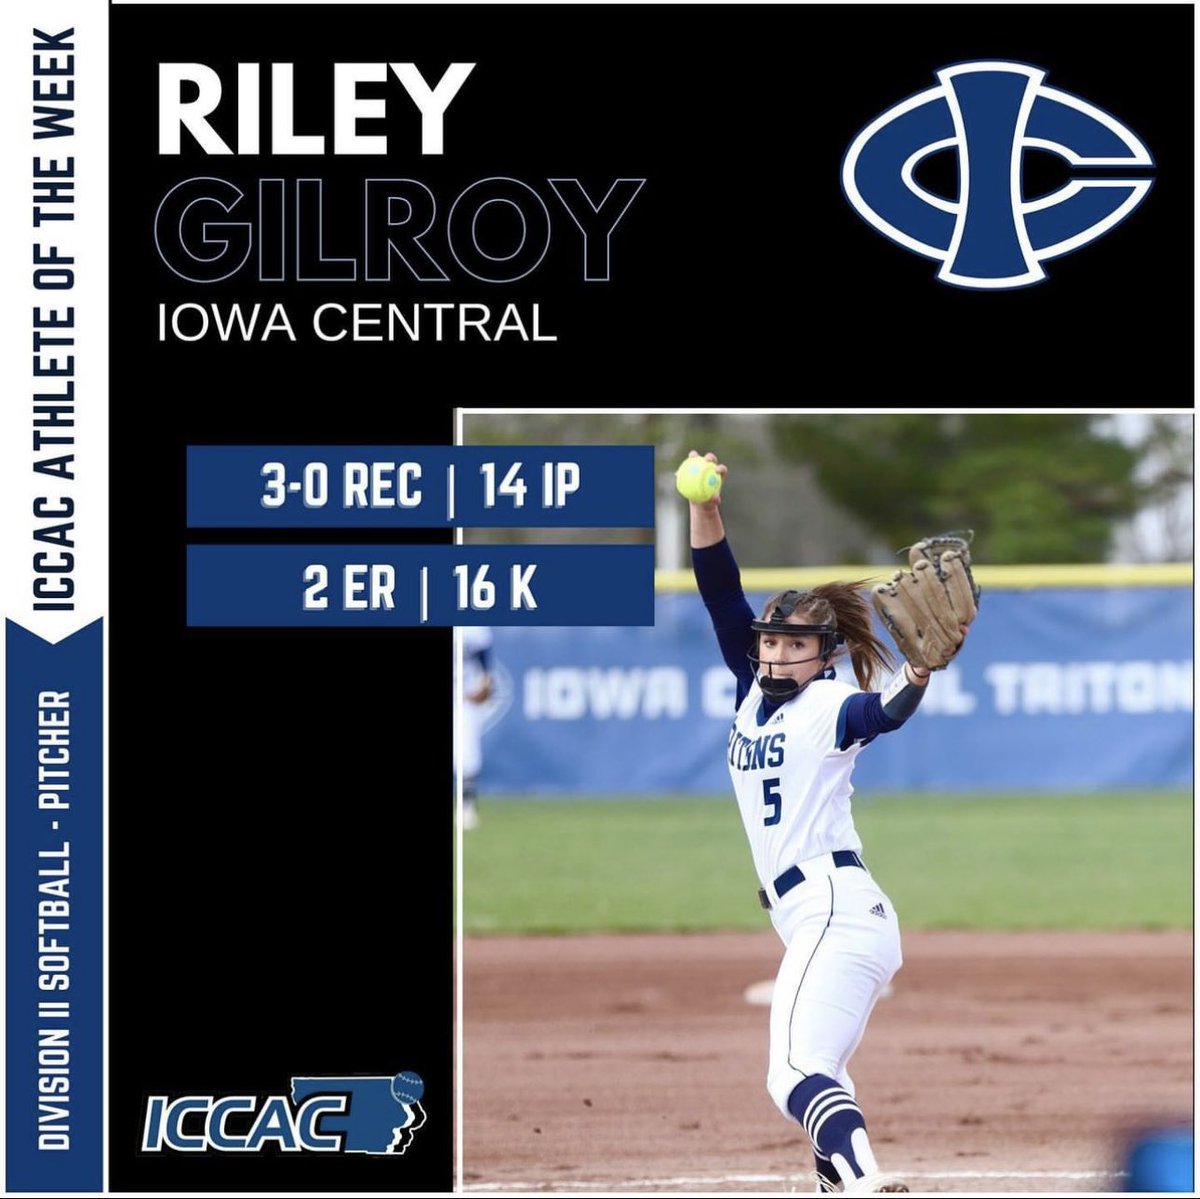 ‼️CONGRATULATIONS Sydney Ballard and Riley Gilroy on ICCAC PLAYERS OF THE WEEK! So proud of you ladies! #RTR #TritonPride #TritonExcellence